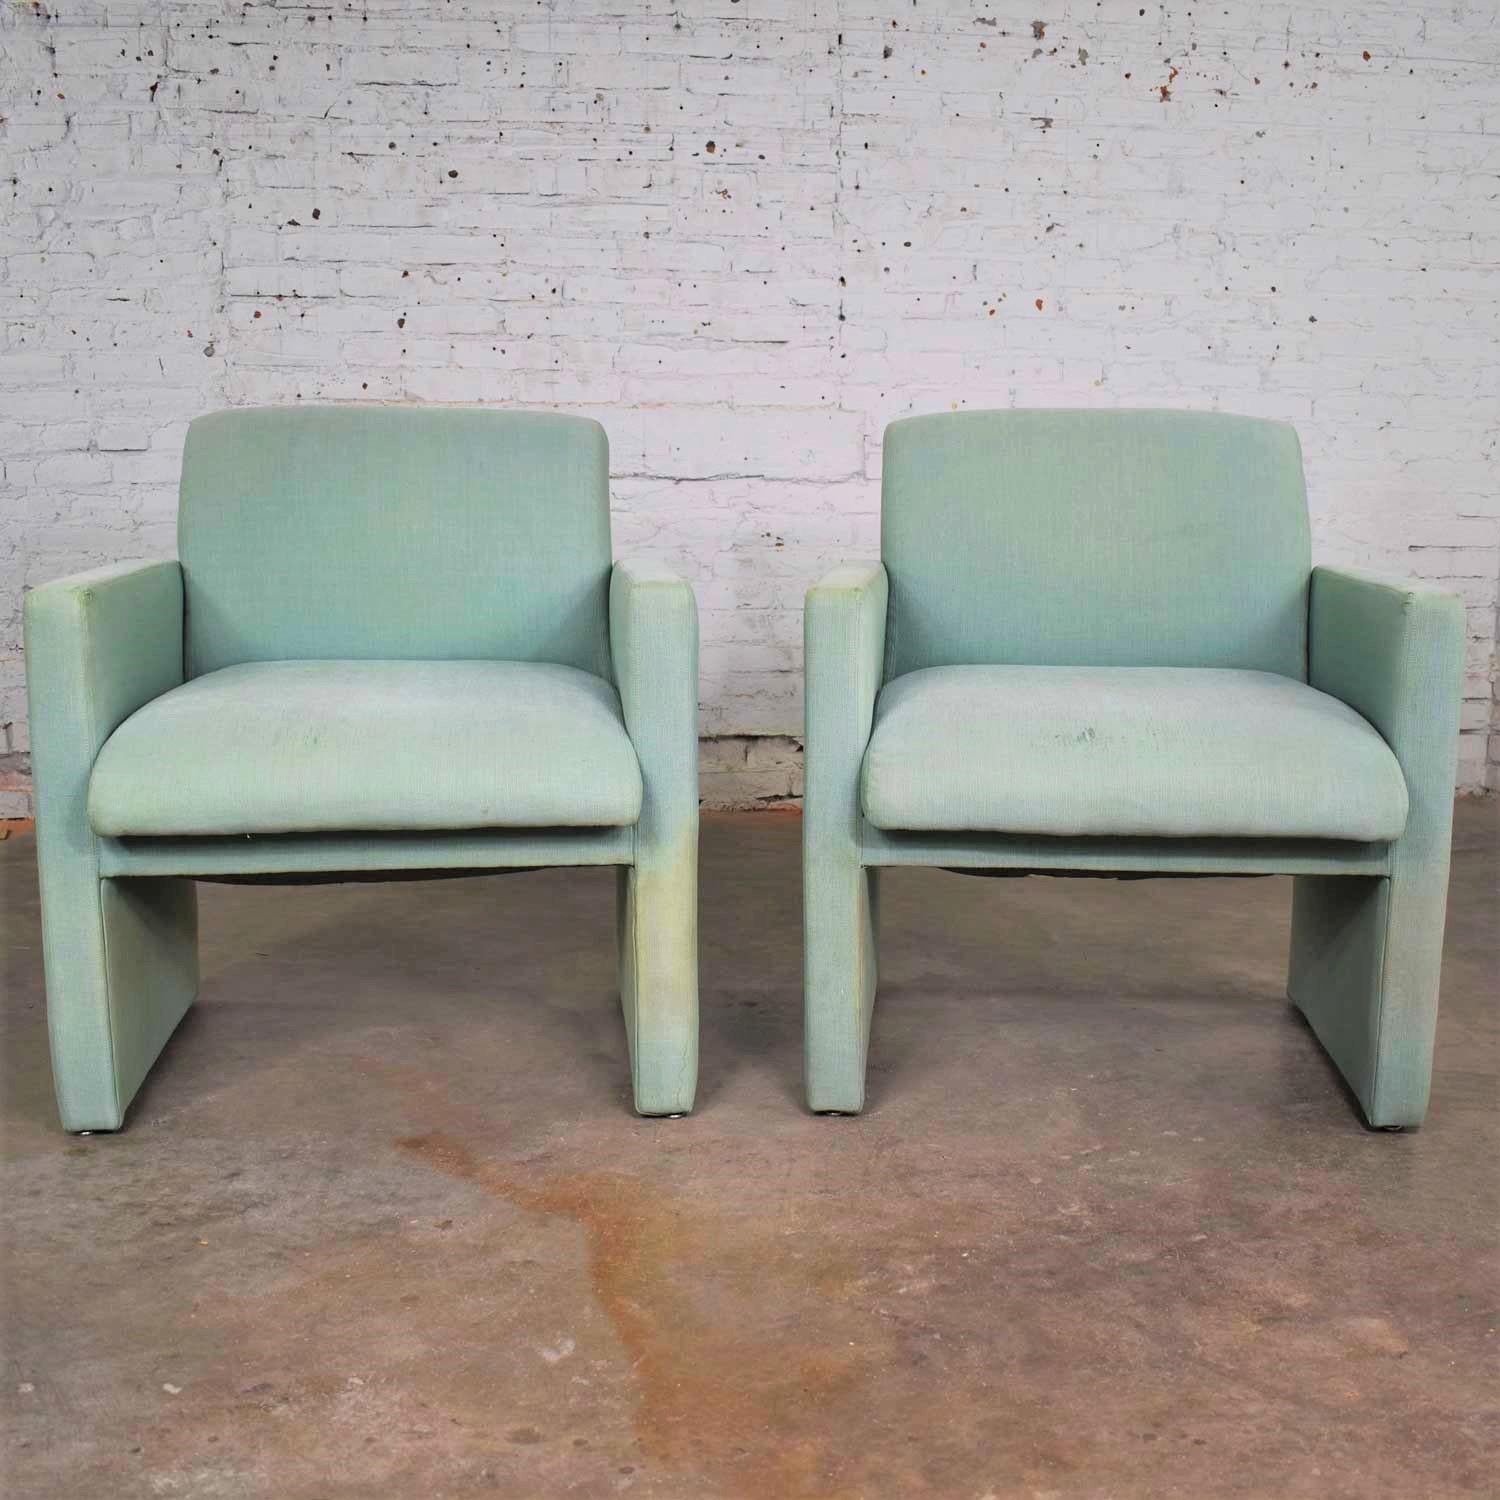 Pair of Petite Modern Accent Chairs in Sea Green 2